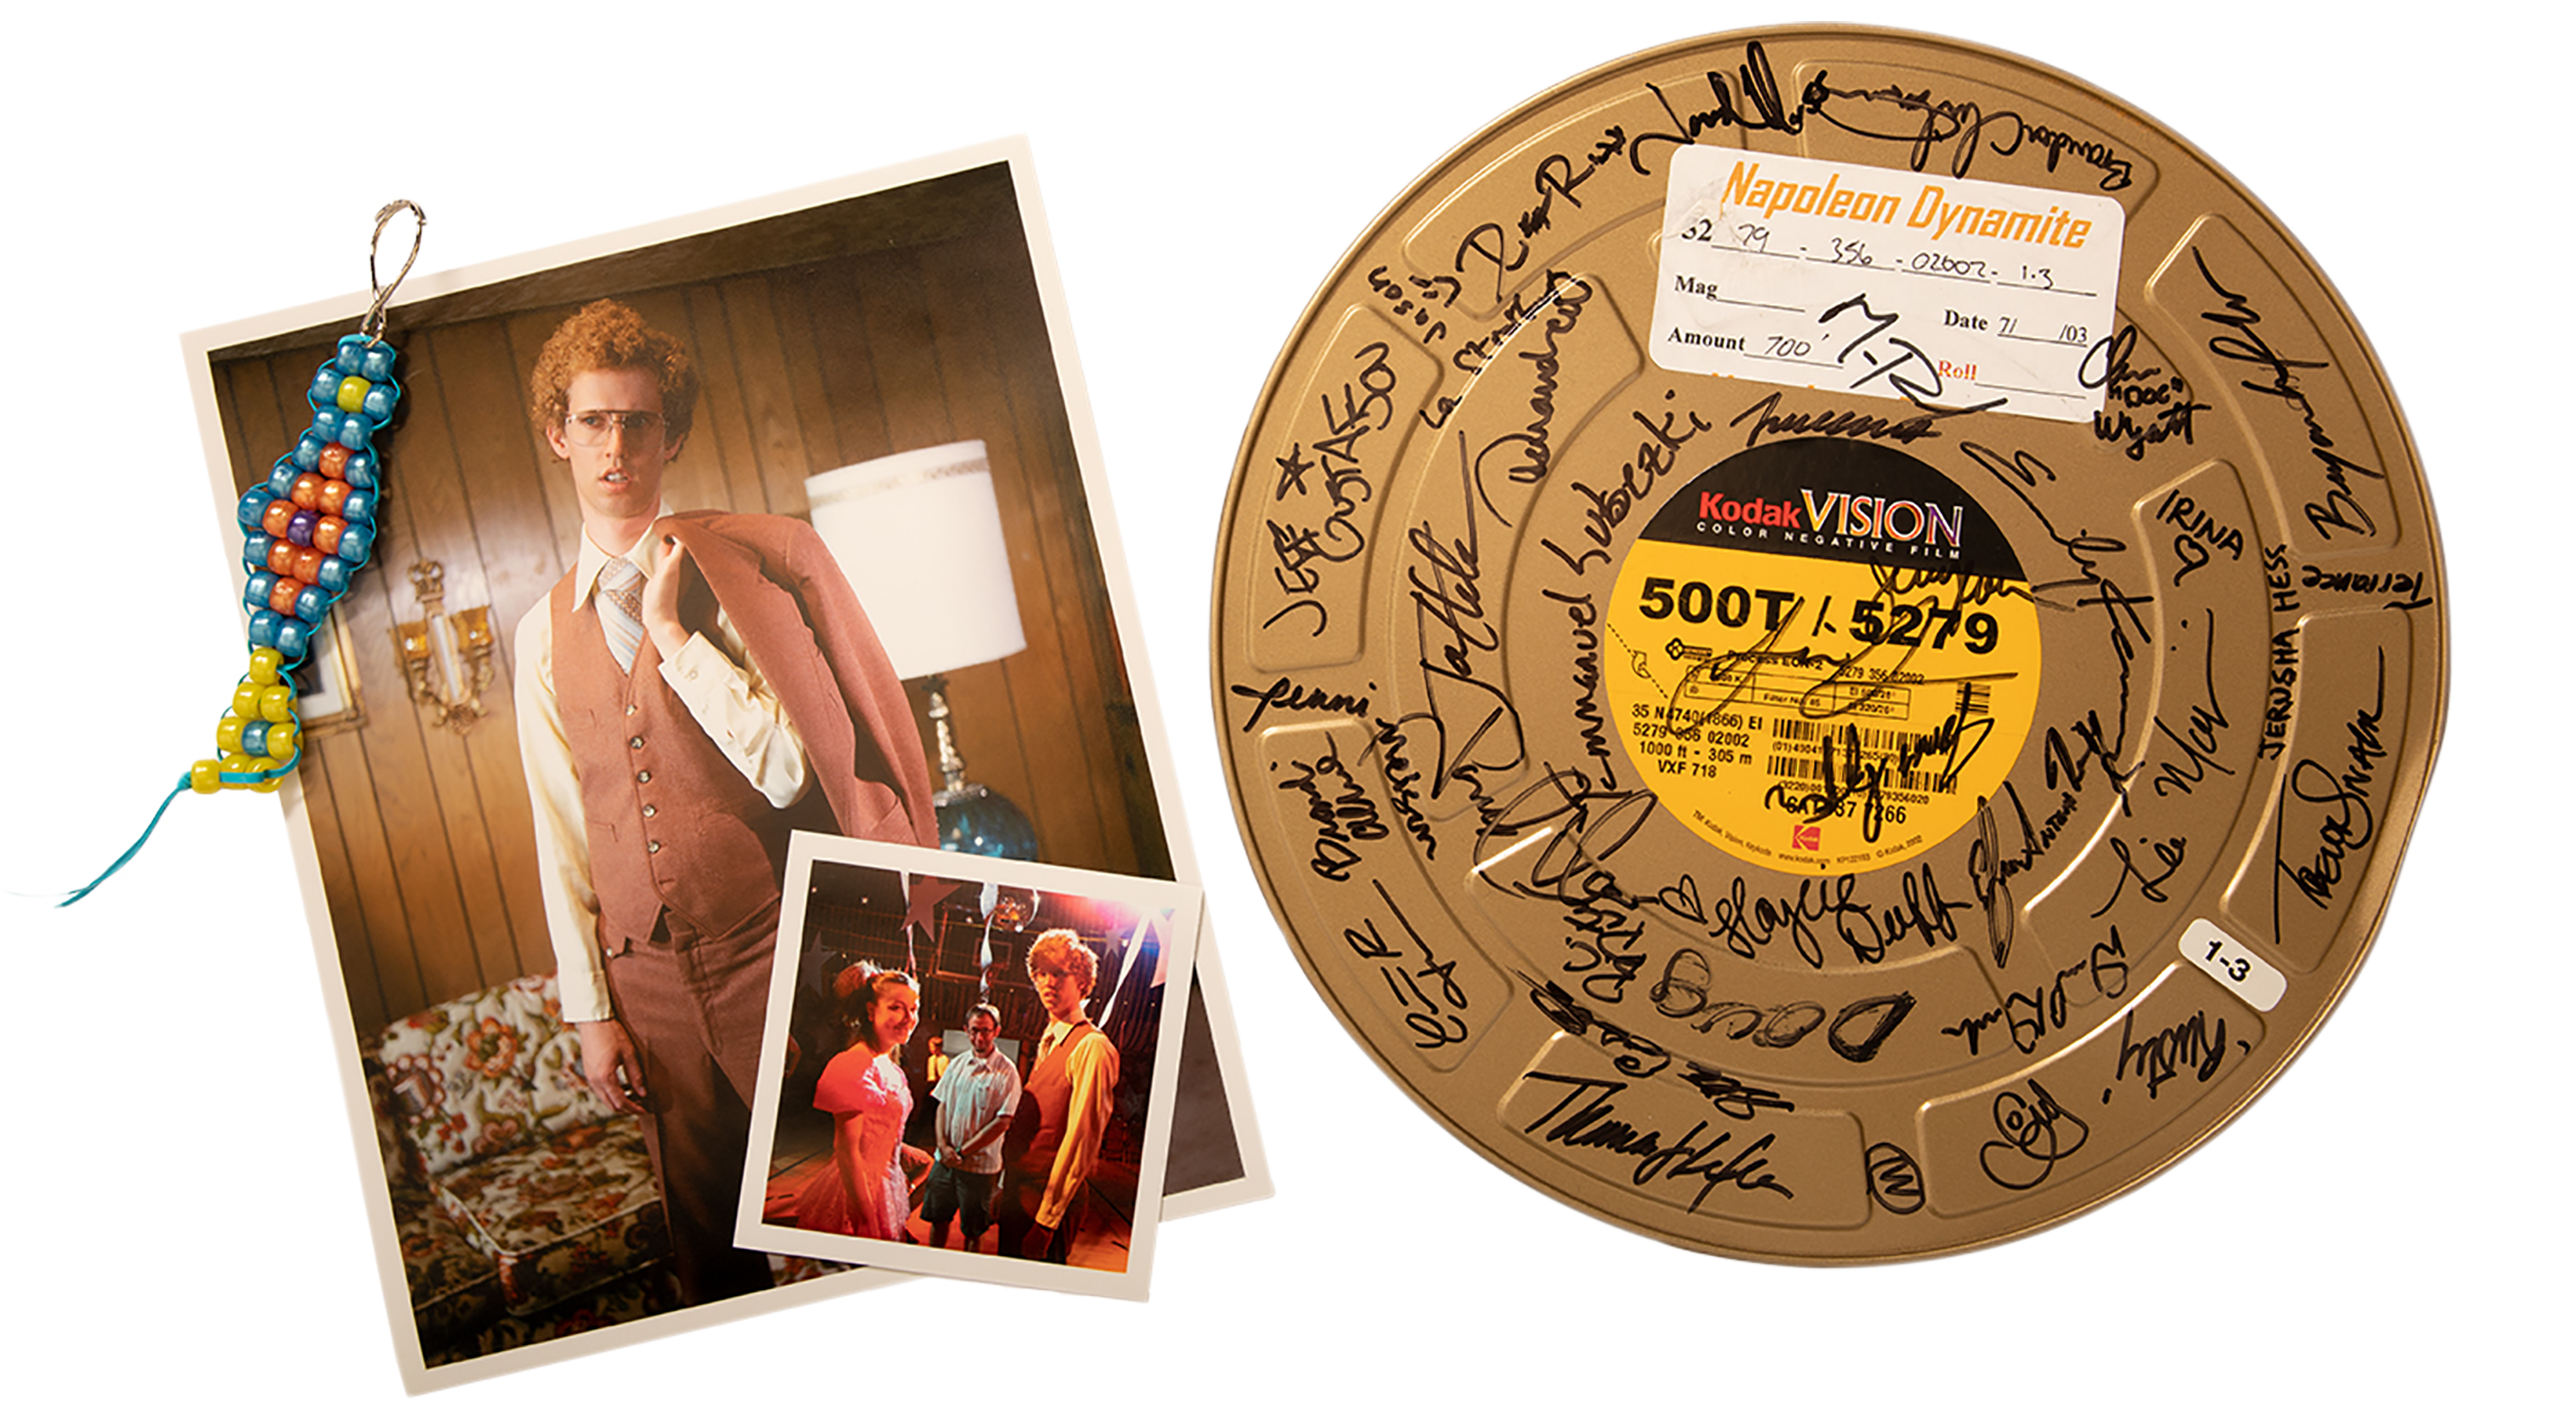 A photo of a boondoggle from the film alongside a photo of Napoleon in his brown suit, a photo of Deb and Napoleon at the school dance, and a film can signed by the team.